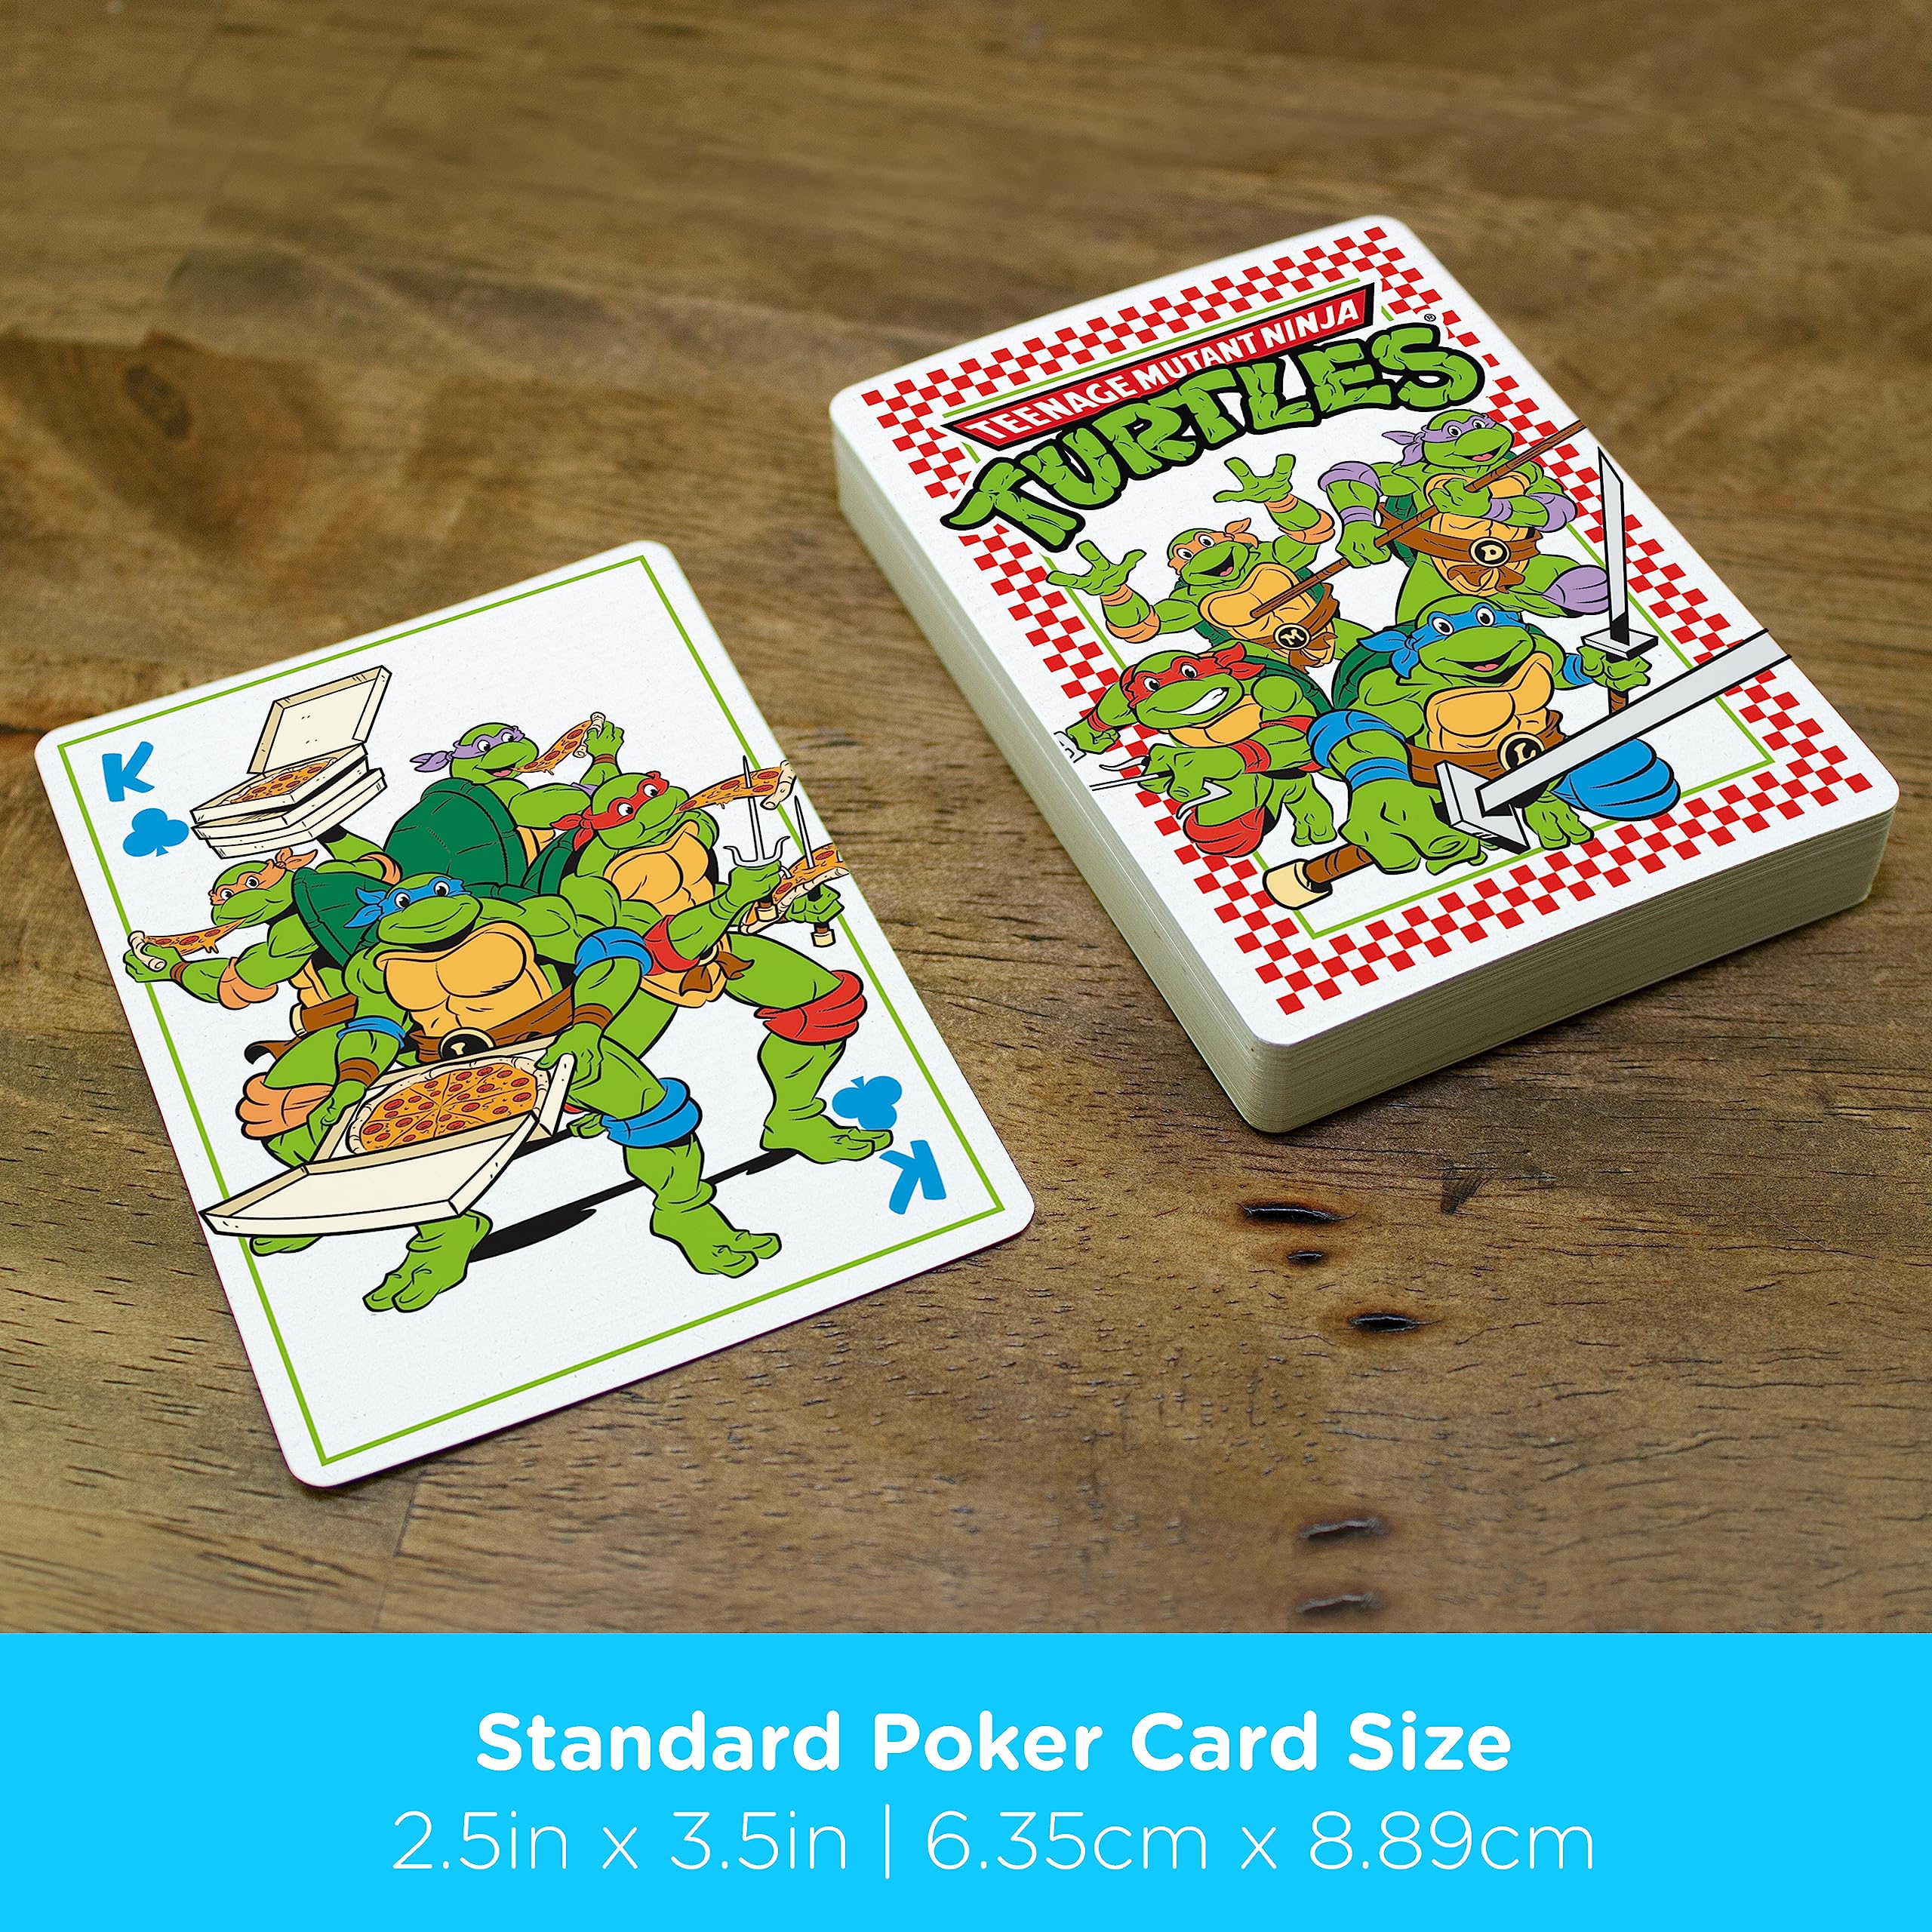 AQUARIUS Teenage Mutant Ninja Turtles Pizza Playing Cards – TMNT Themed Deck of Cards for Your Favorite Card Games - Officially Licensed TMNT Merchandise & Collectibles